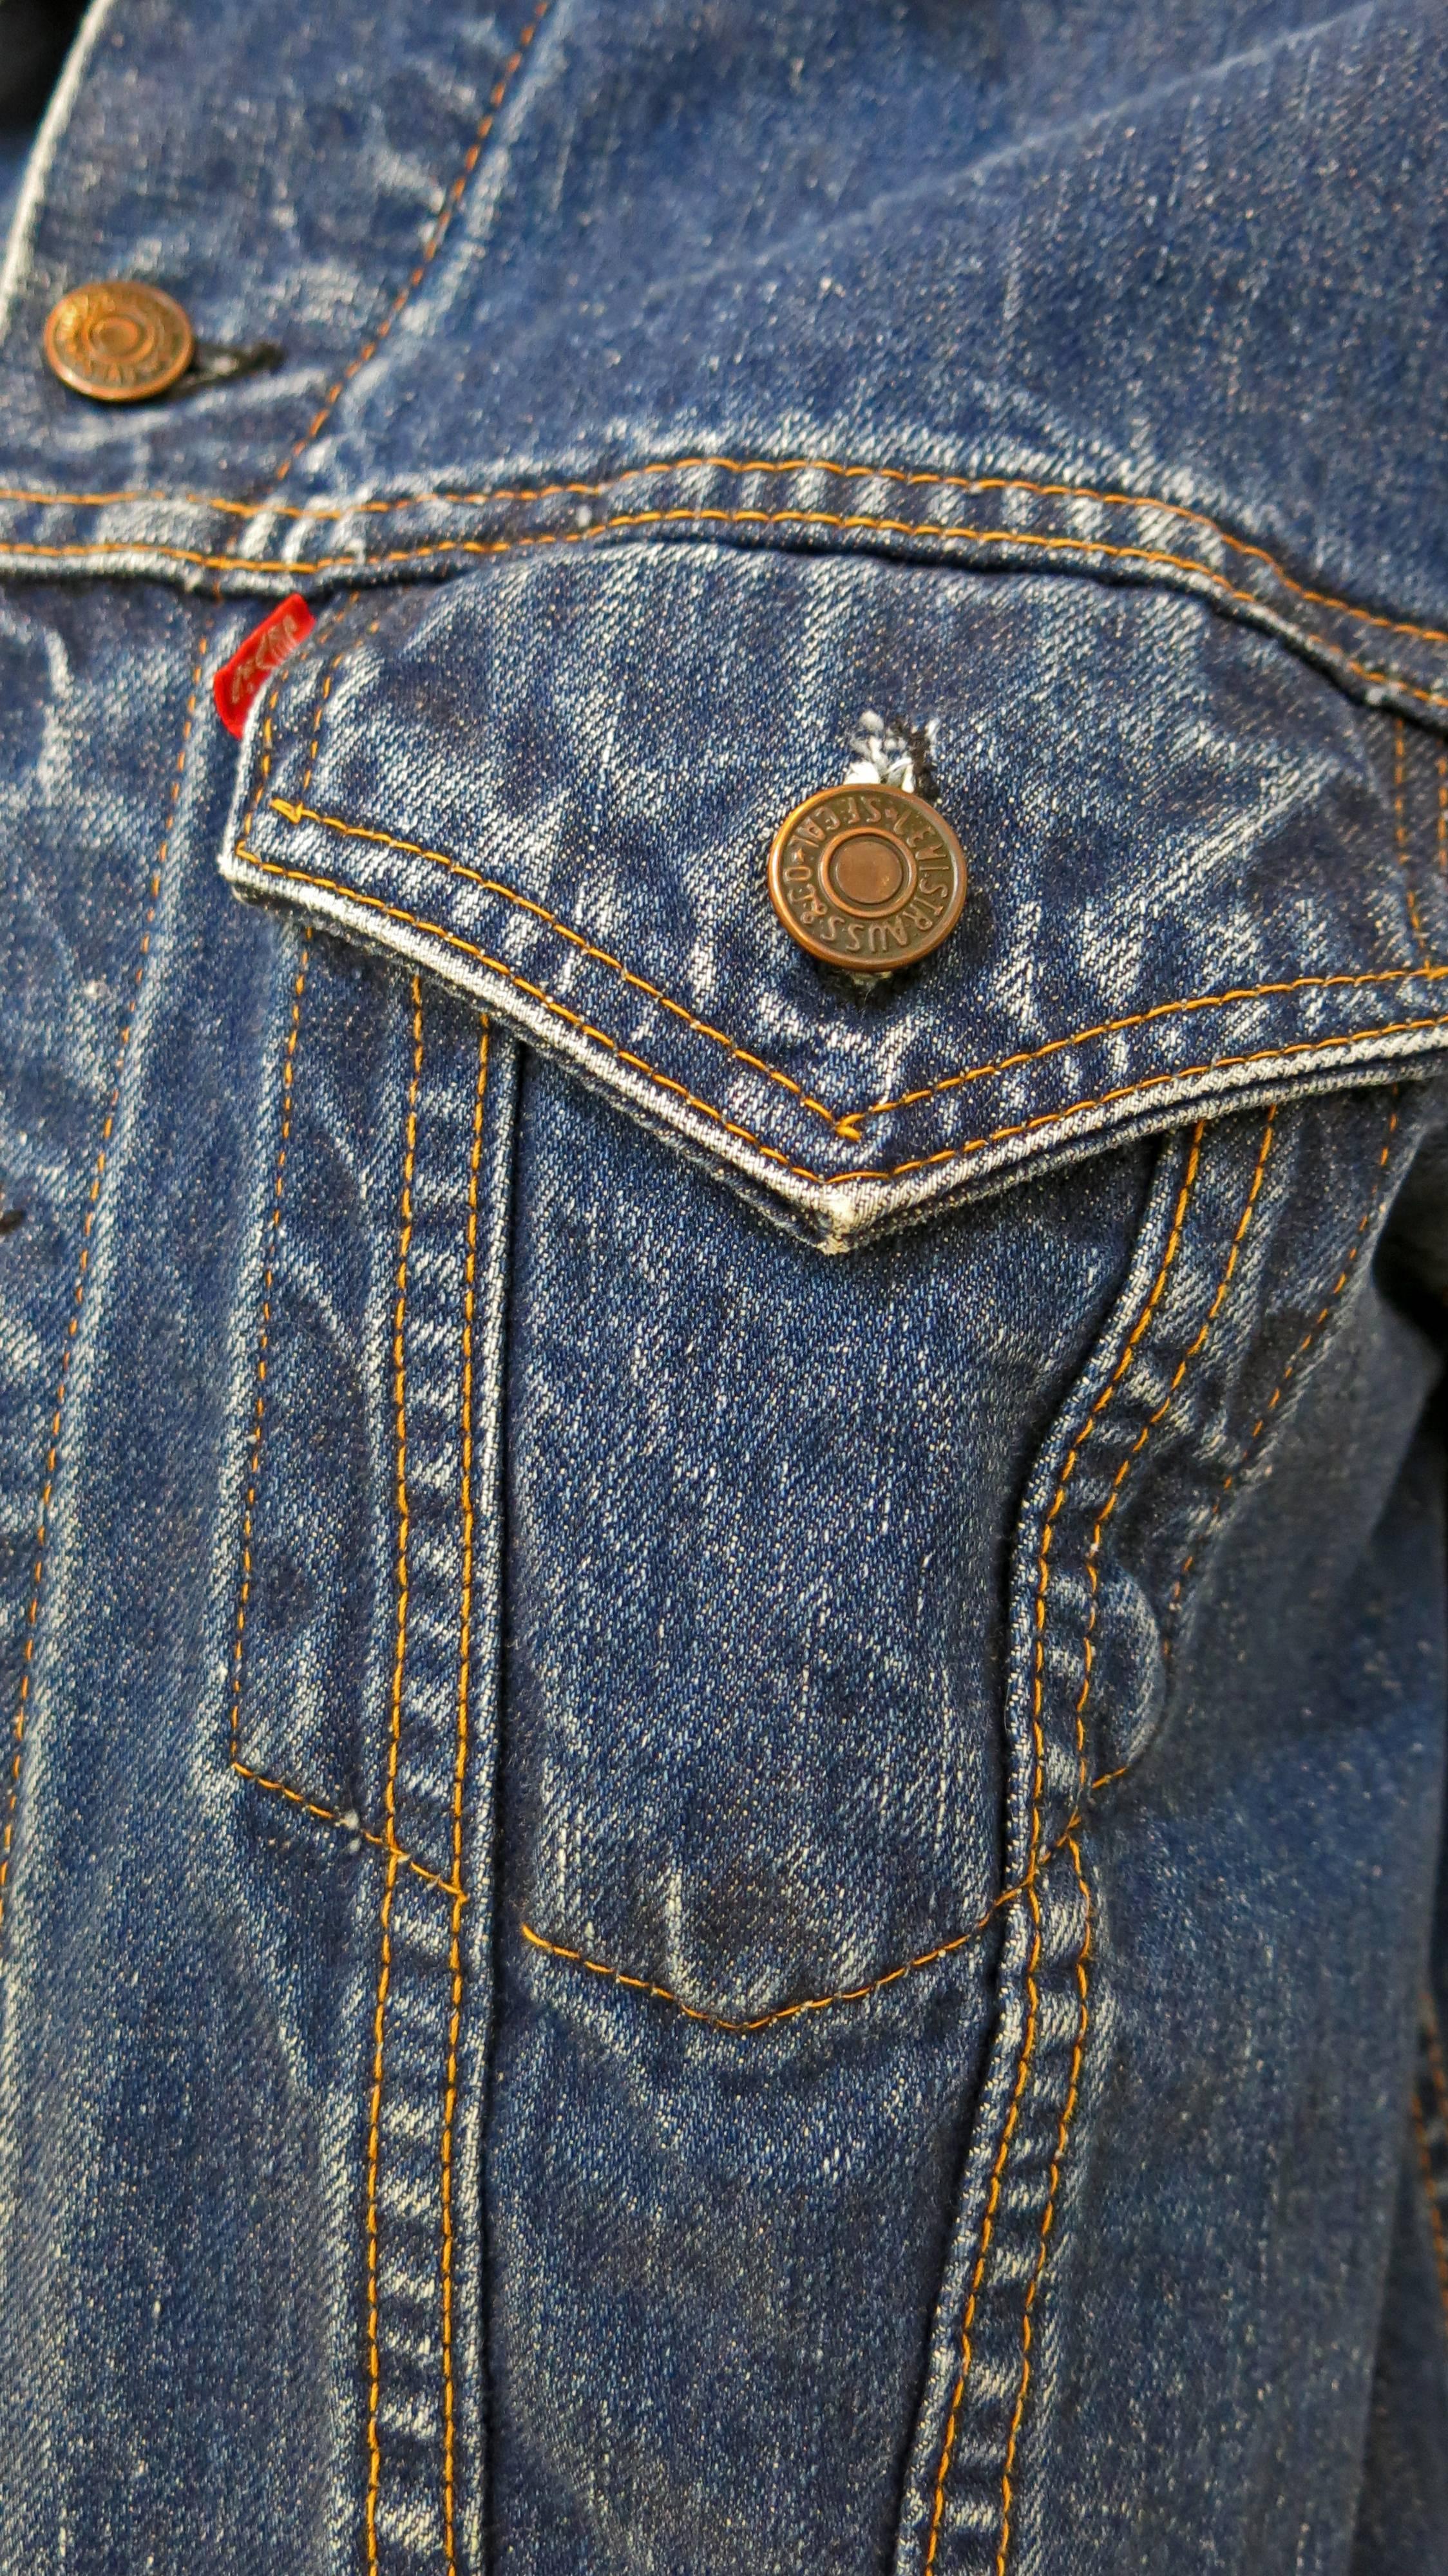 Indigo wash Levi's classic denim jacket. In the center of the back of the jacket there are two palm trees, the sun water and grass are embroidered. Has two breast pockets. Some fading throughout as a result of age. Some holes forming at the